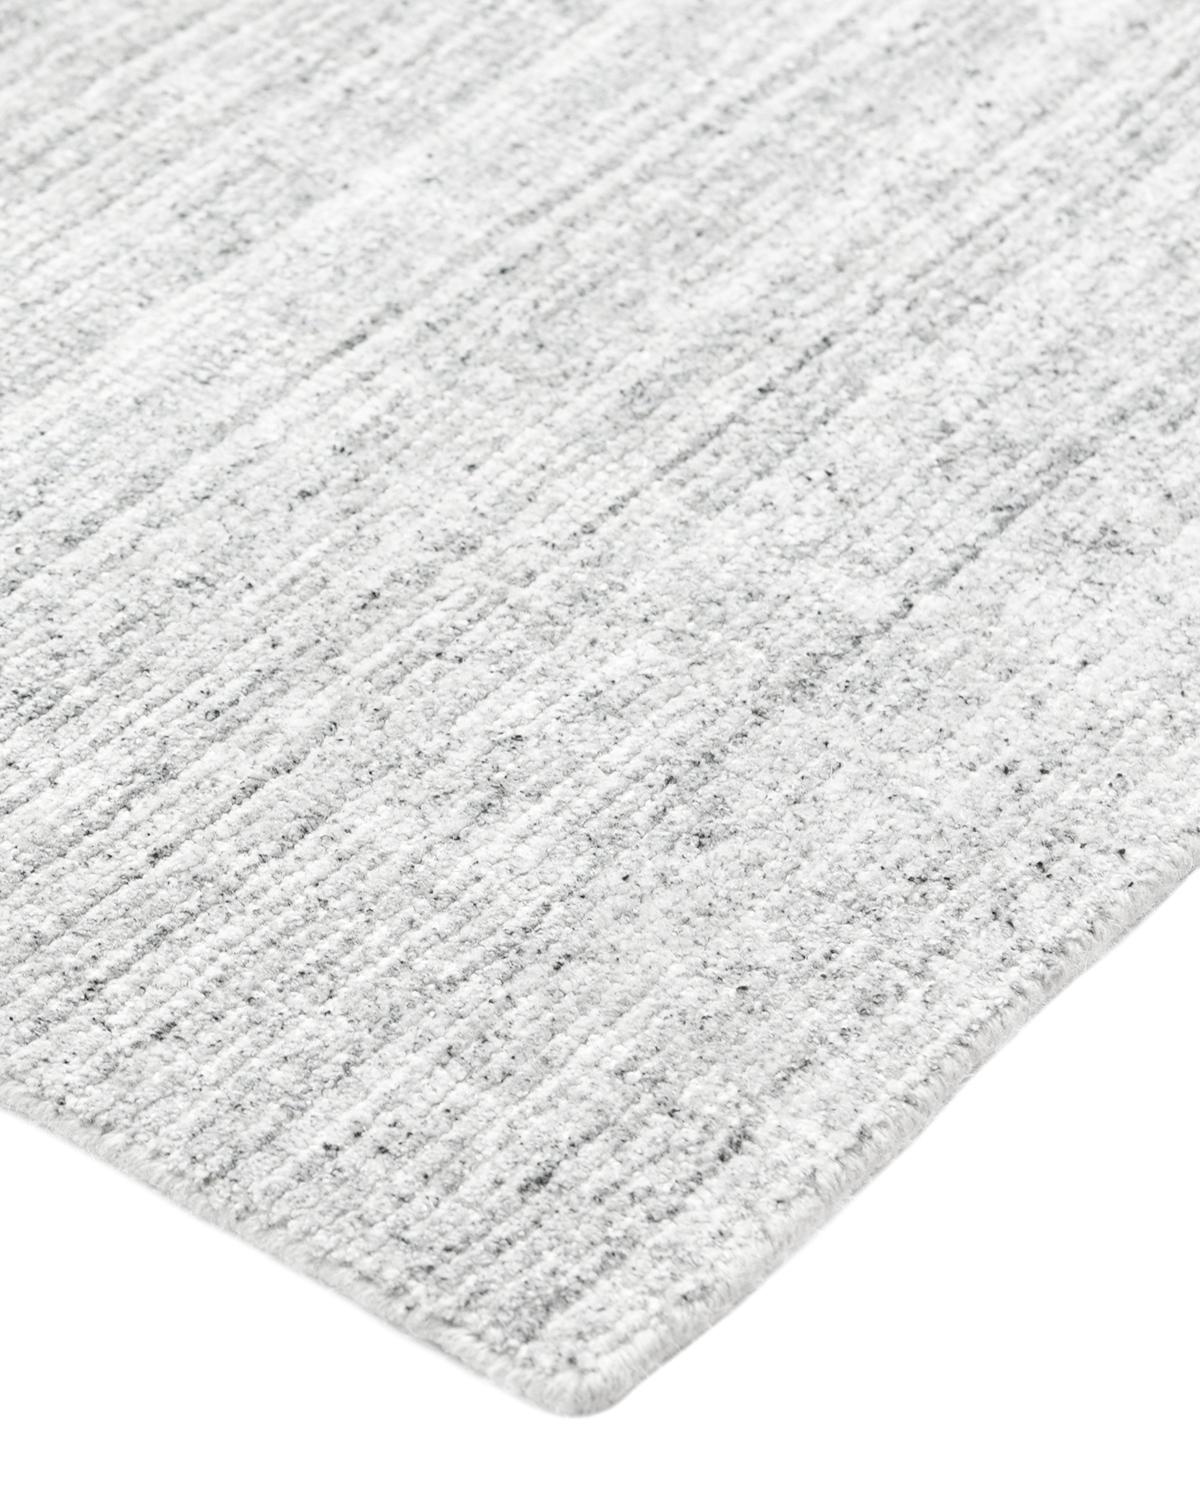 Subtle tone-on-tone stripes give the Solid collection a depth and sophistication all its own. These rugs can pull the disparate elements of a room into a beautifully cohesive whole; they can also introduce an unexpected but welcome jolt of color